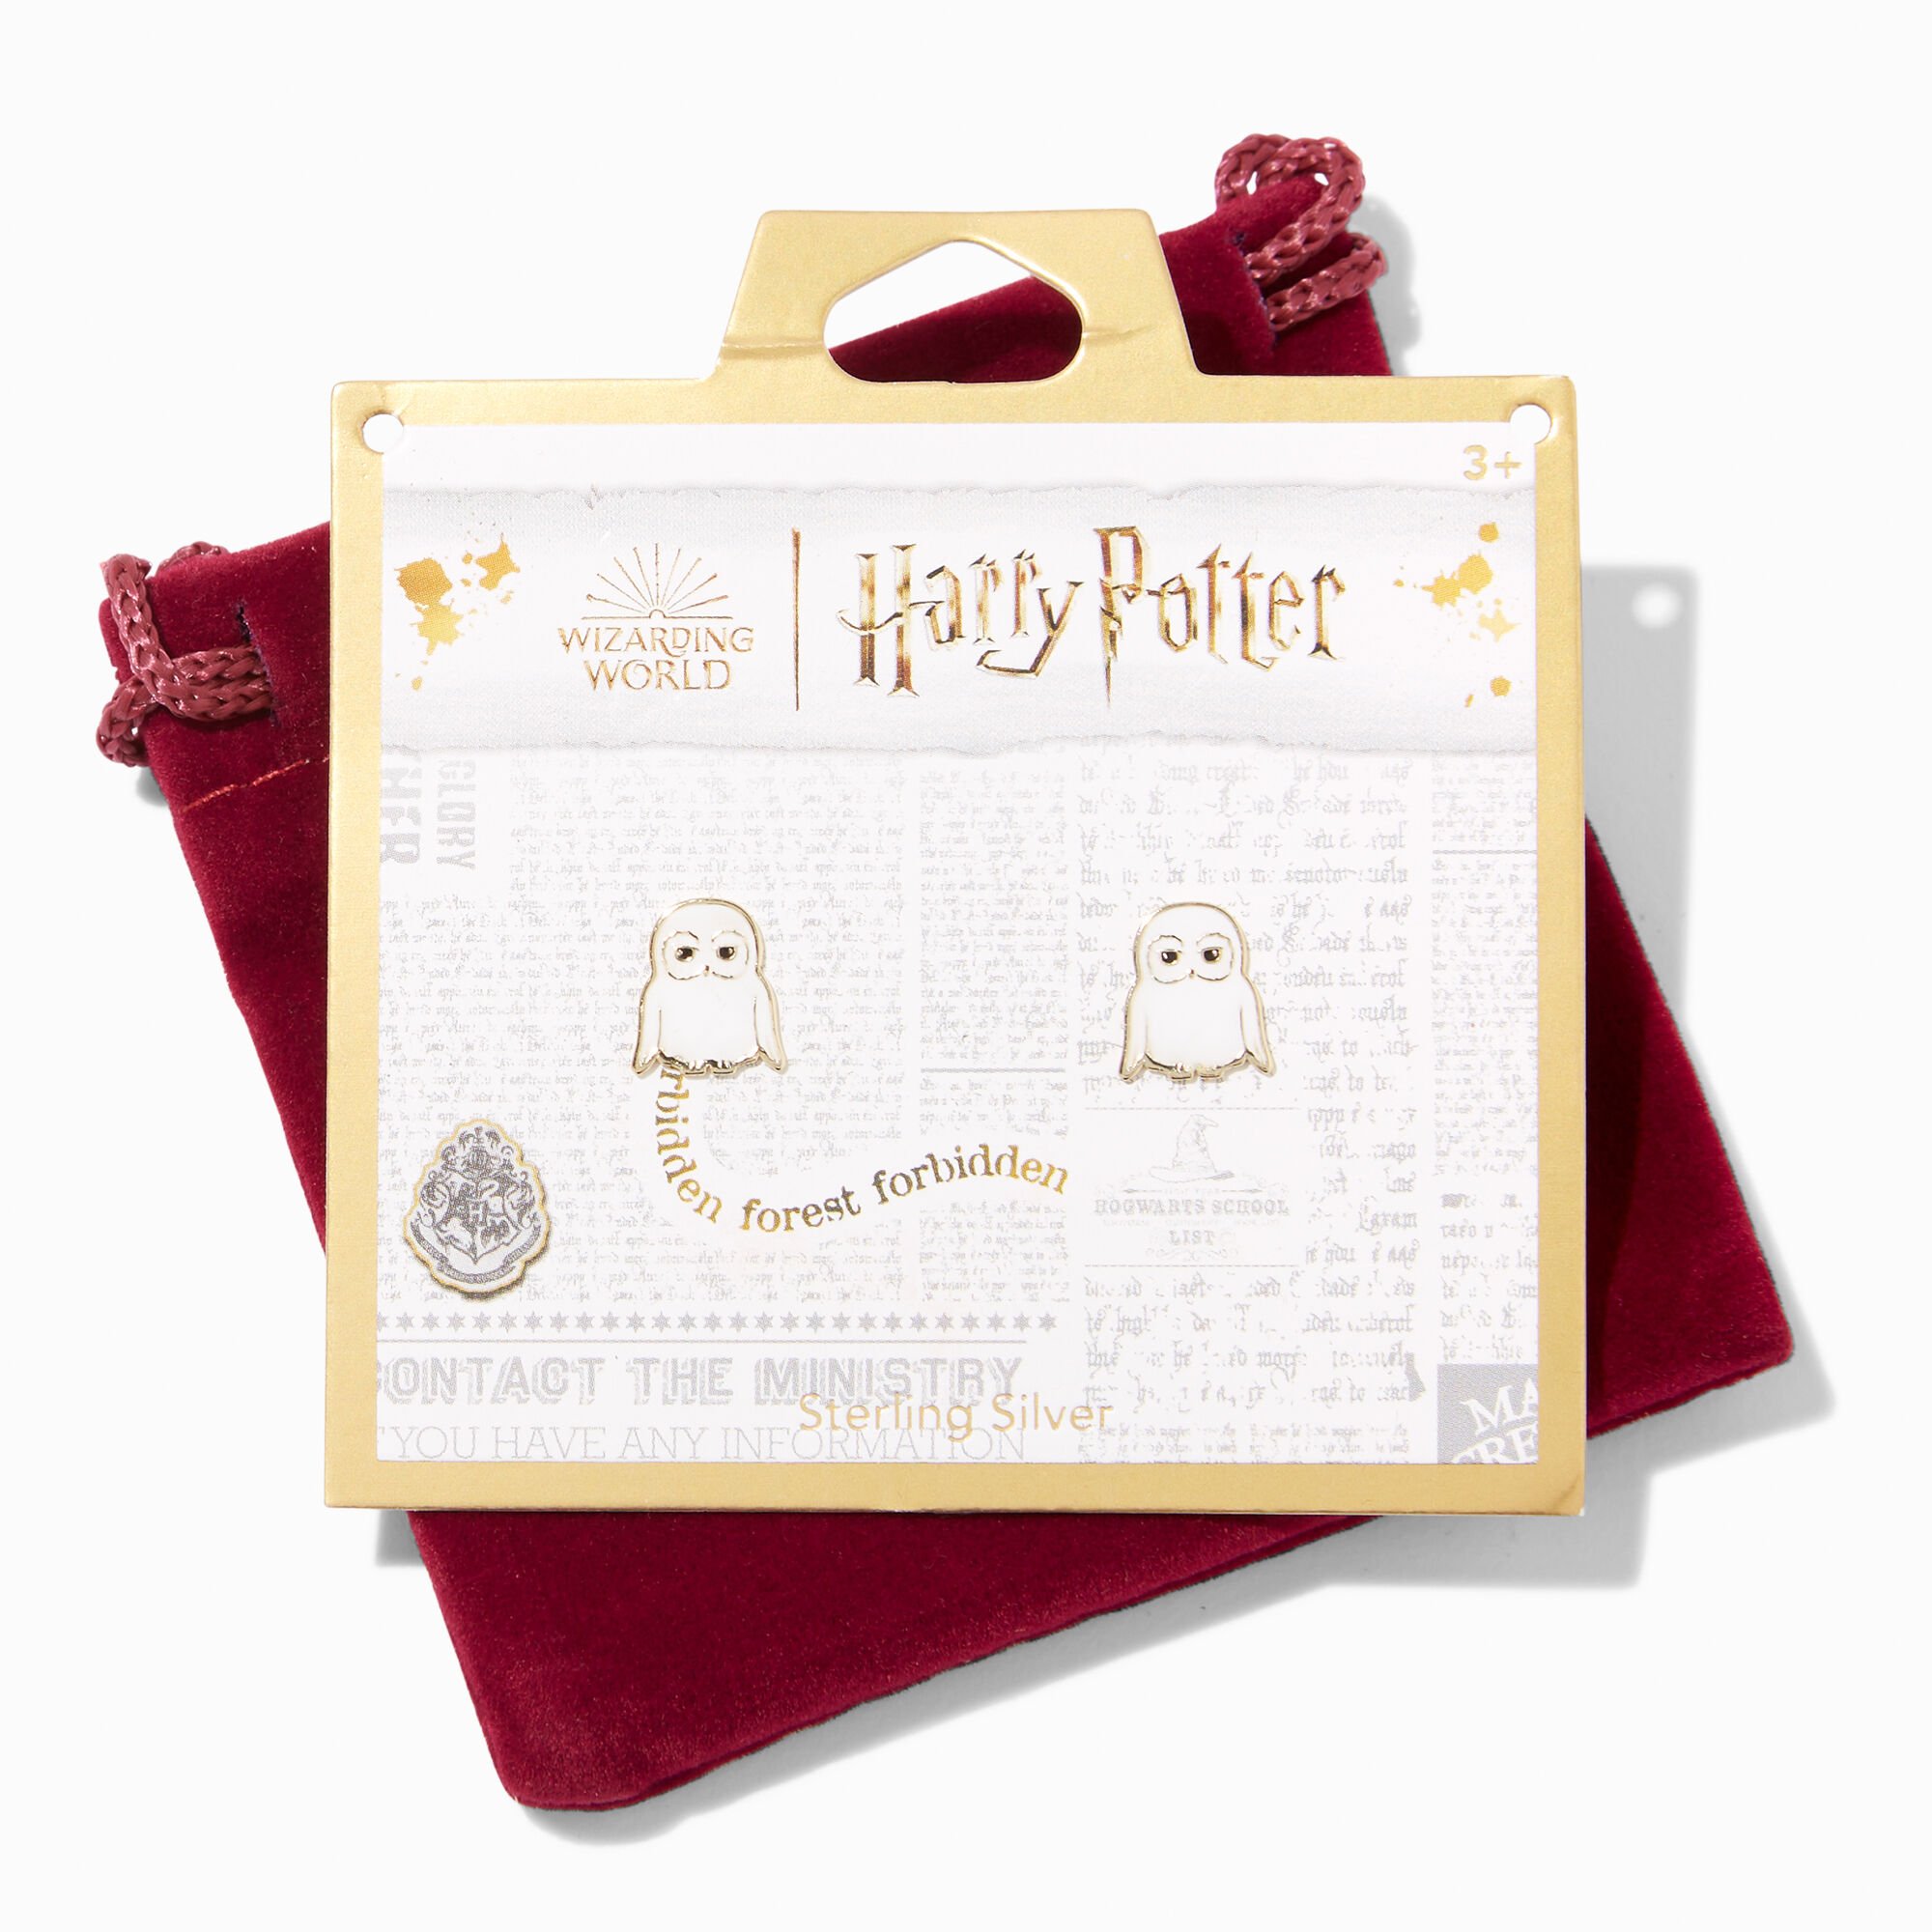 View Claires Harry Potter Hedwig Stud Earrings Silver information